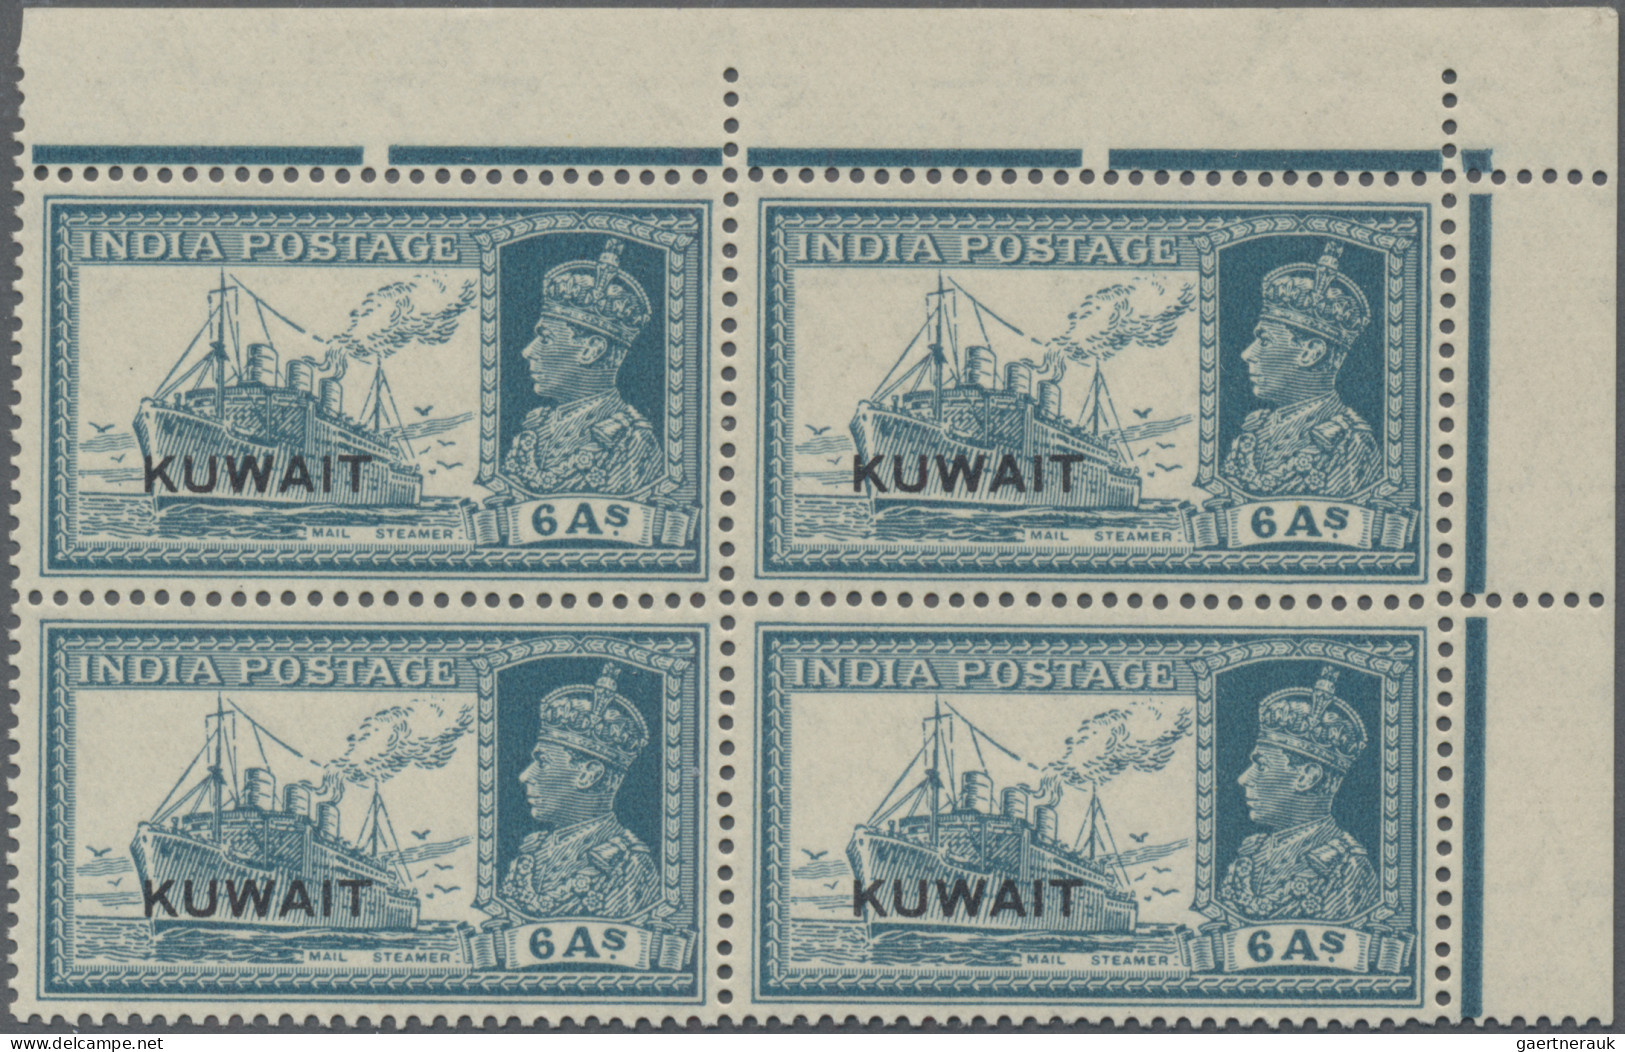 Kuwait: 1939 Complete set of 13 India KGVI. definitives optd. "KUWAIT" each in m